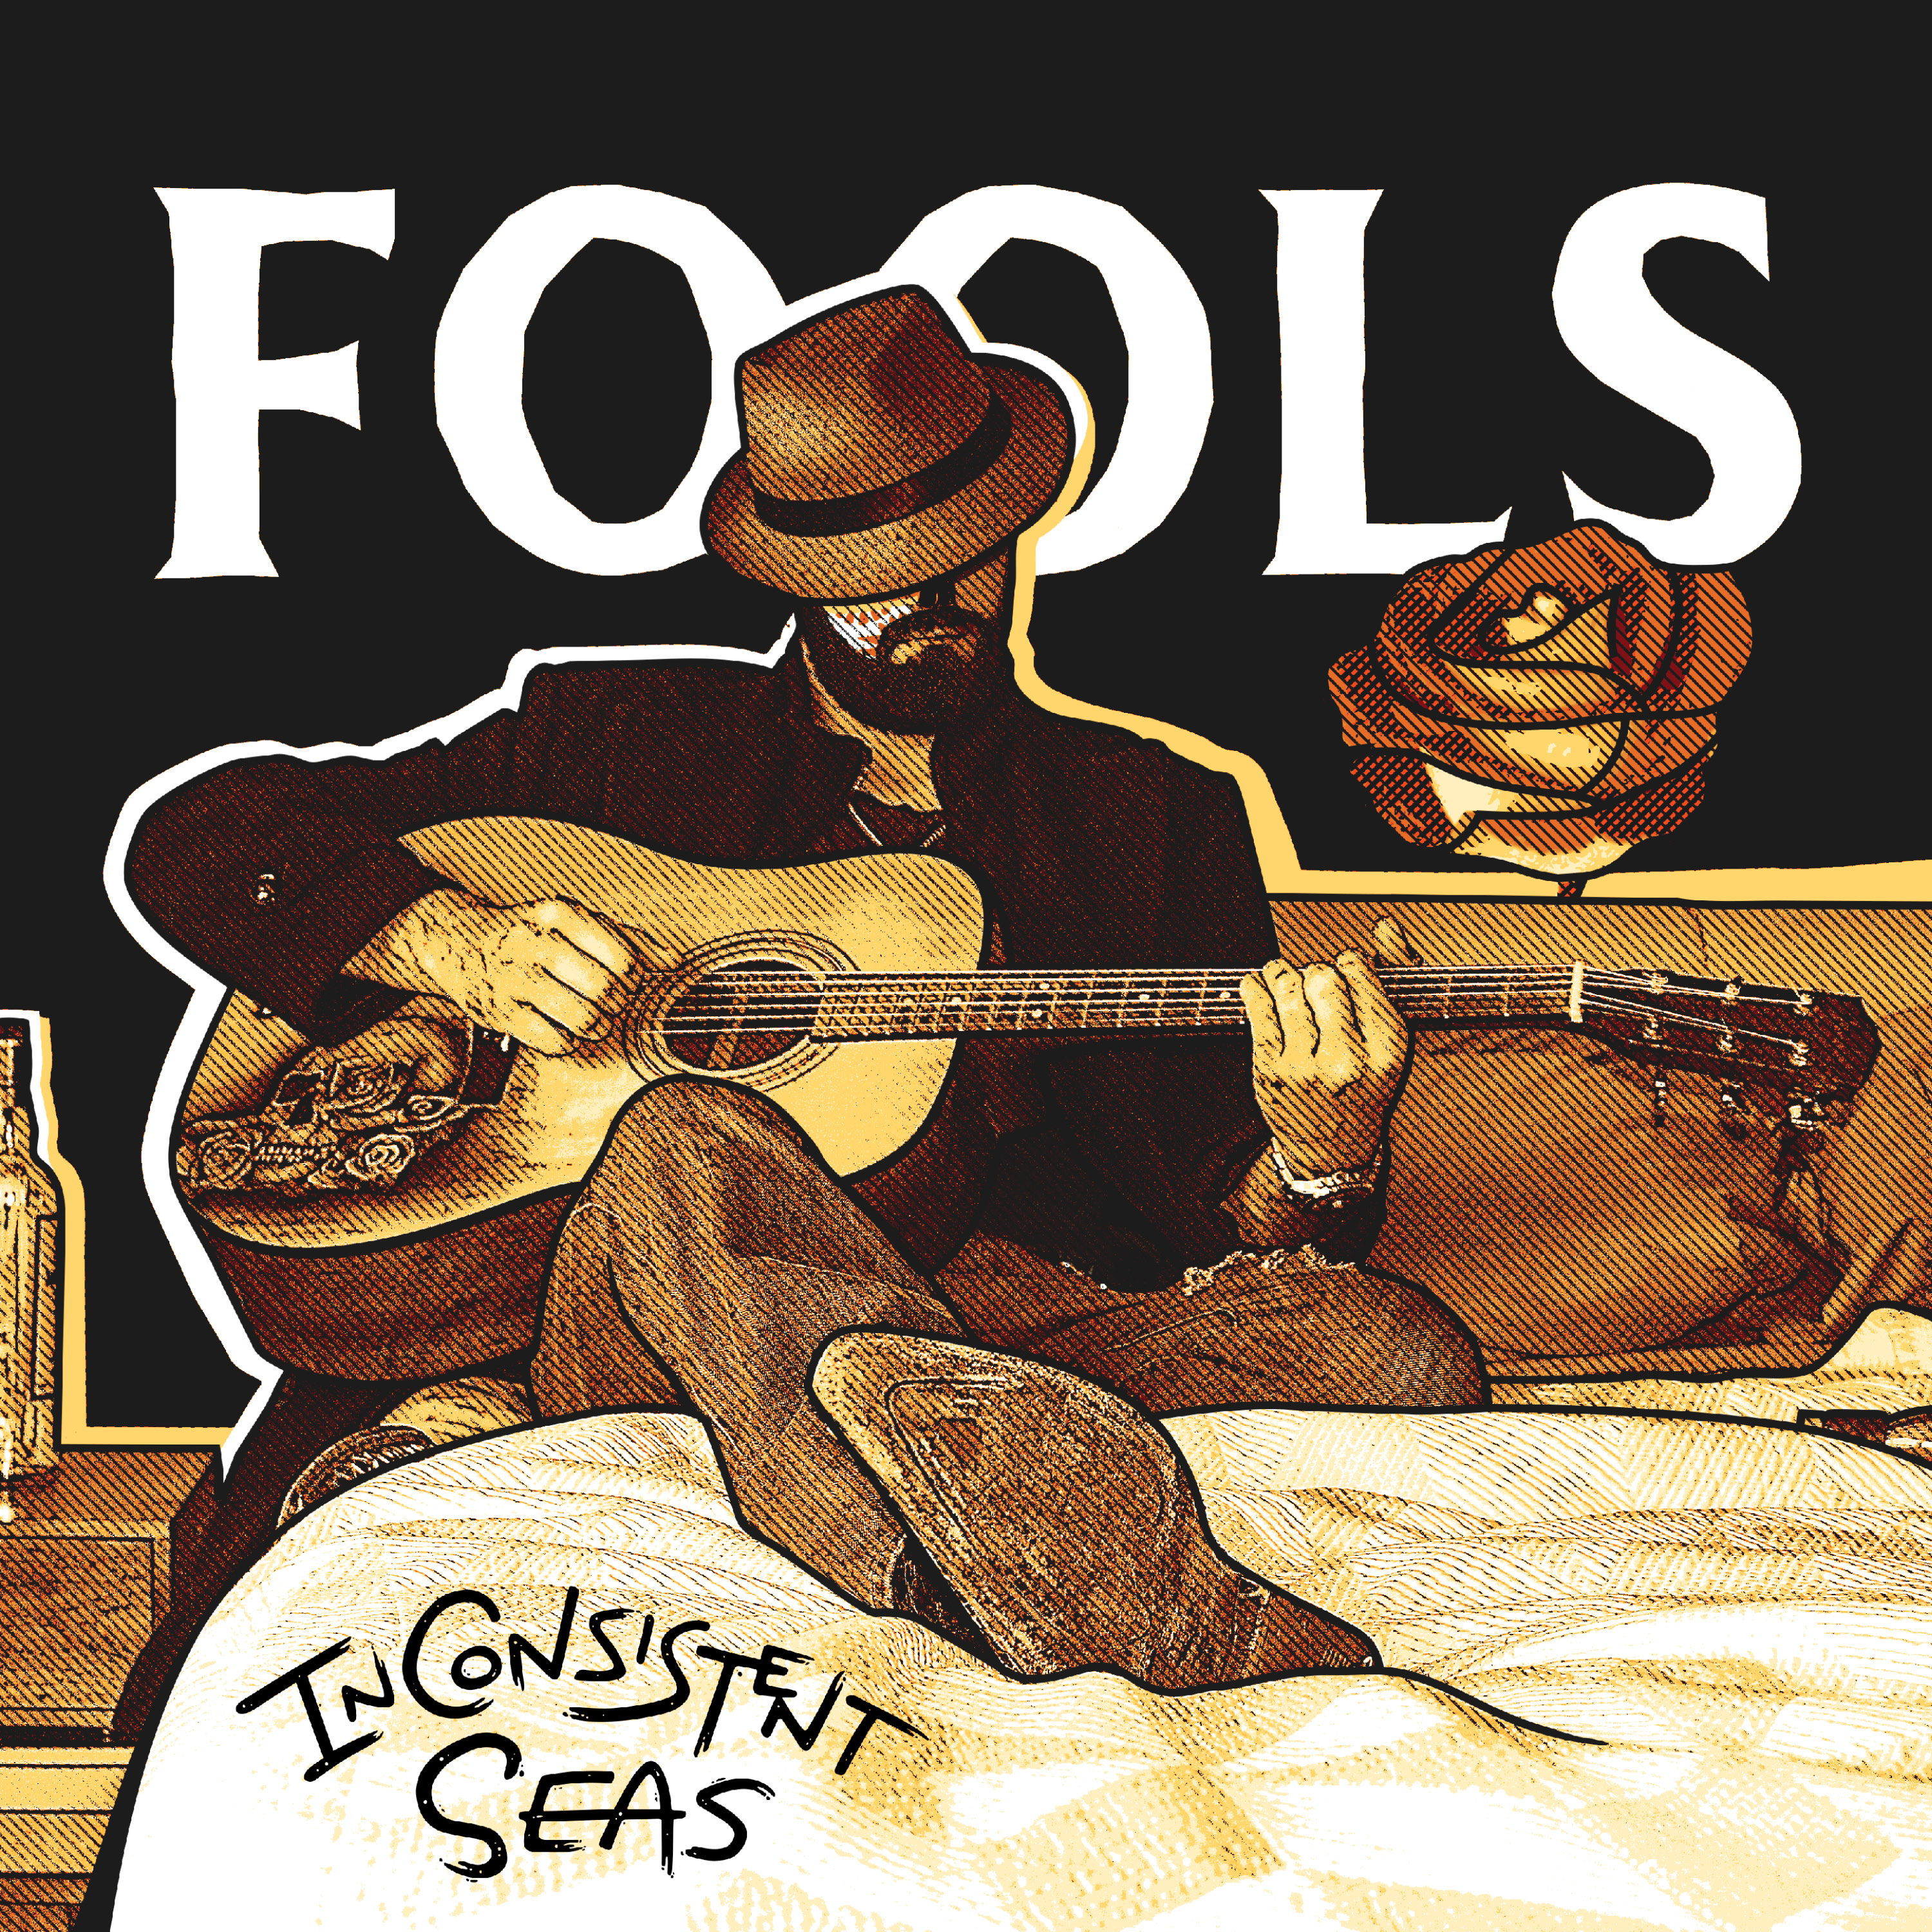 cover art for the single FOOLS